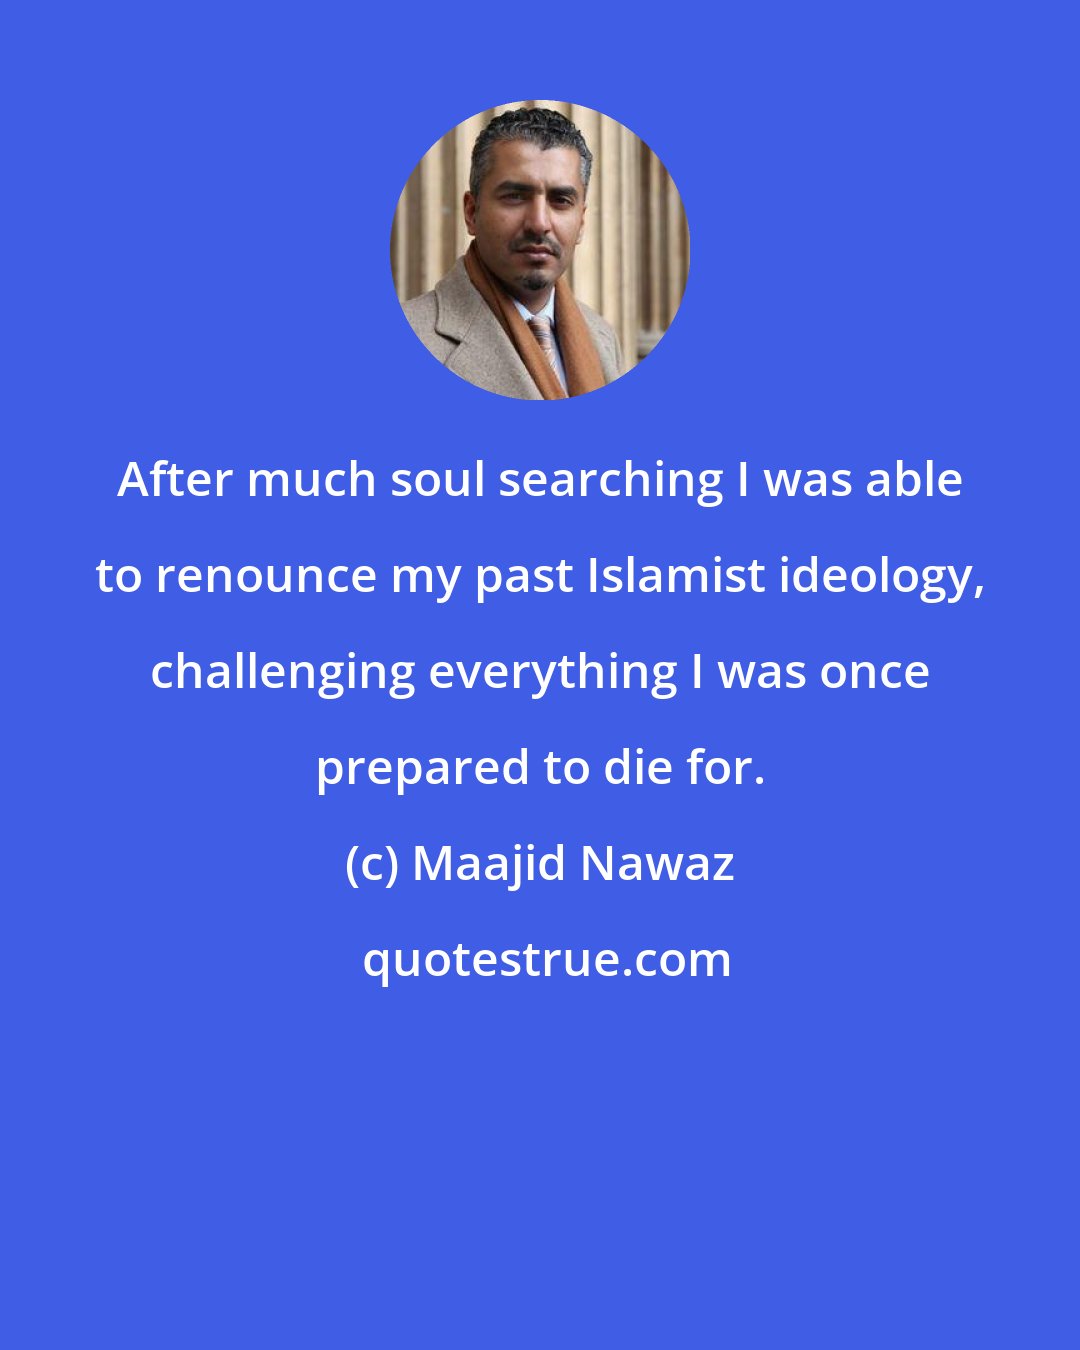 Maajid Nawaz: After much soul searching I was able to renounce my past Islamist ideology, challenging everything I was once prepared to die for.